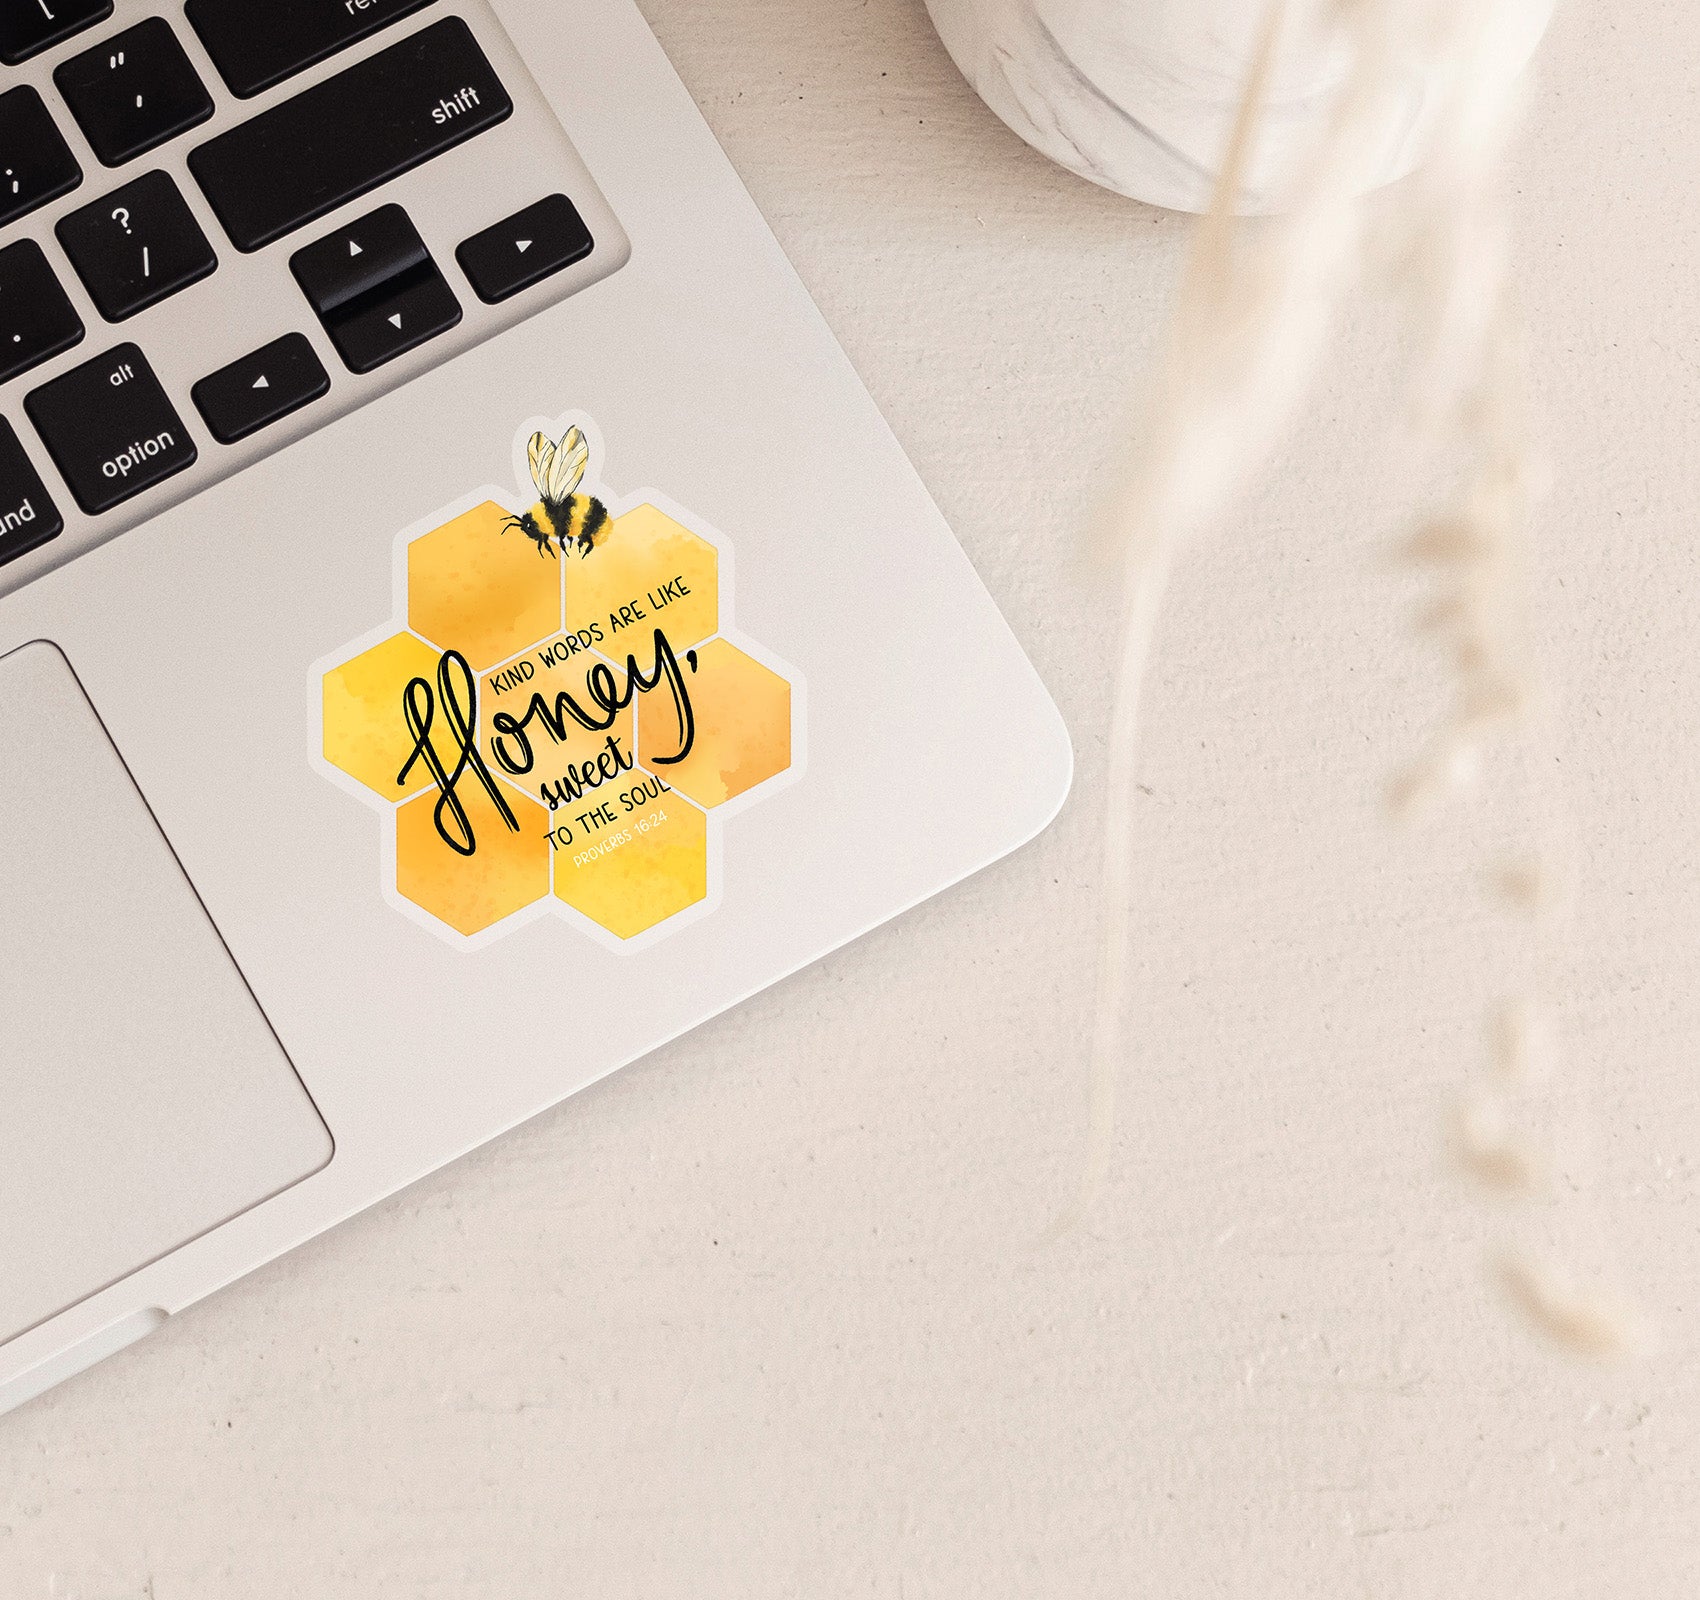 Kind words are like honey, sweet to the soul. This Proverbs 16:24 Bible verse Christian laptop sticker has a honeycomb and bumble bee